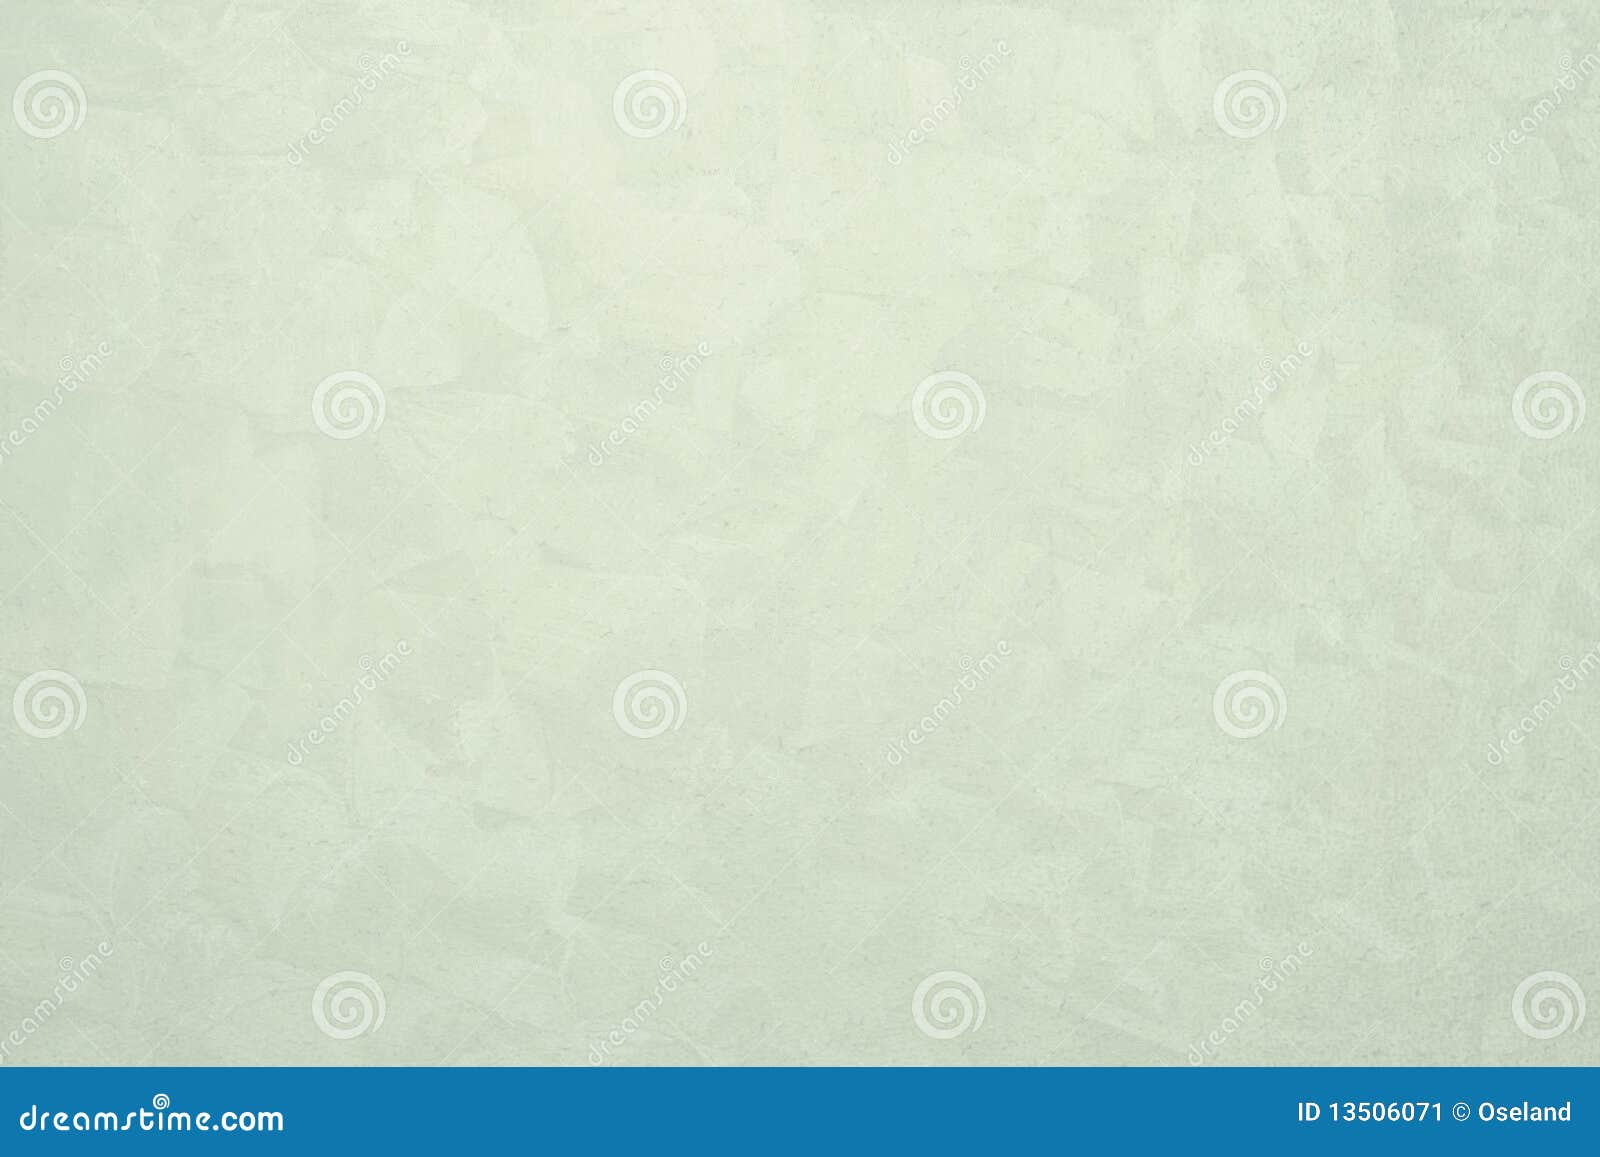 mint green background